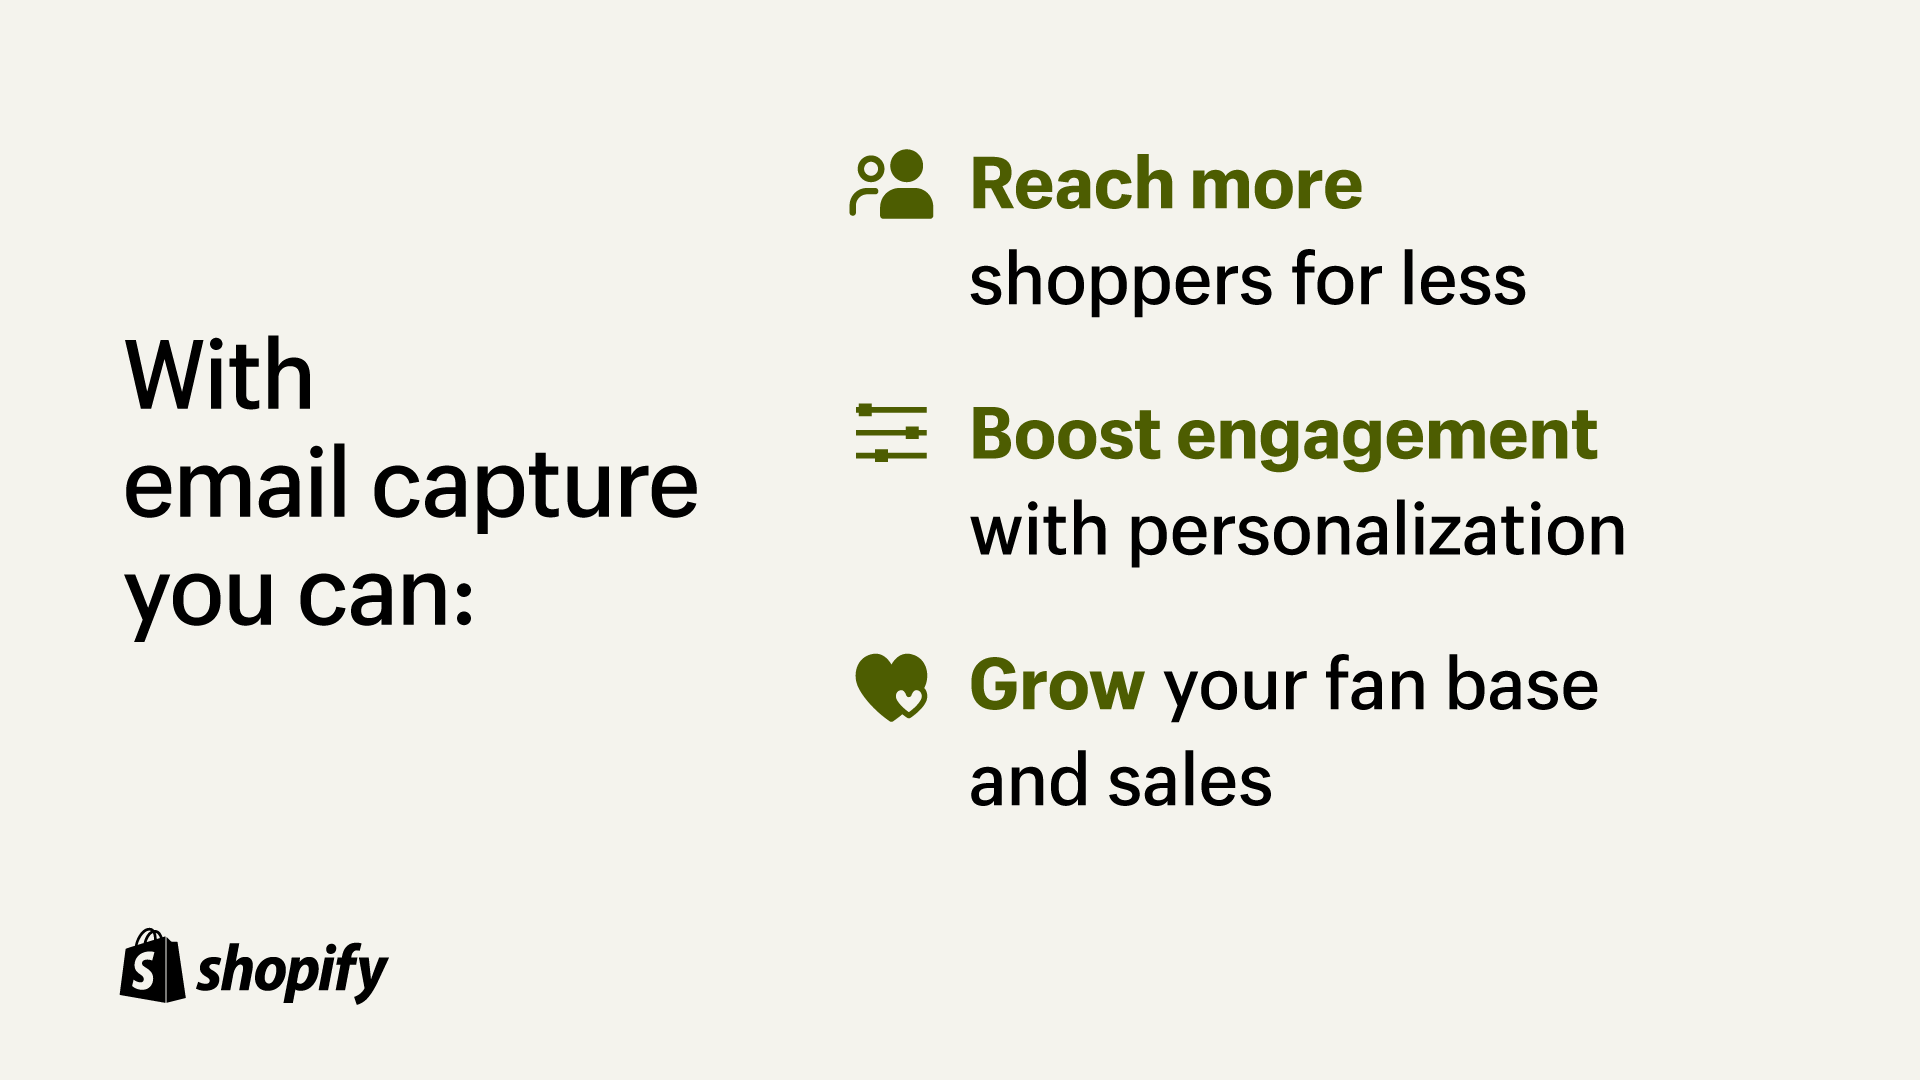 Beige background with black and green text that reads about how email capture can help you reach more shoppers for less, boost engagement with personalization, and grow your fan base and sales